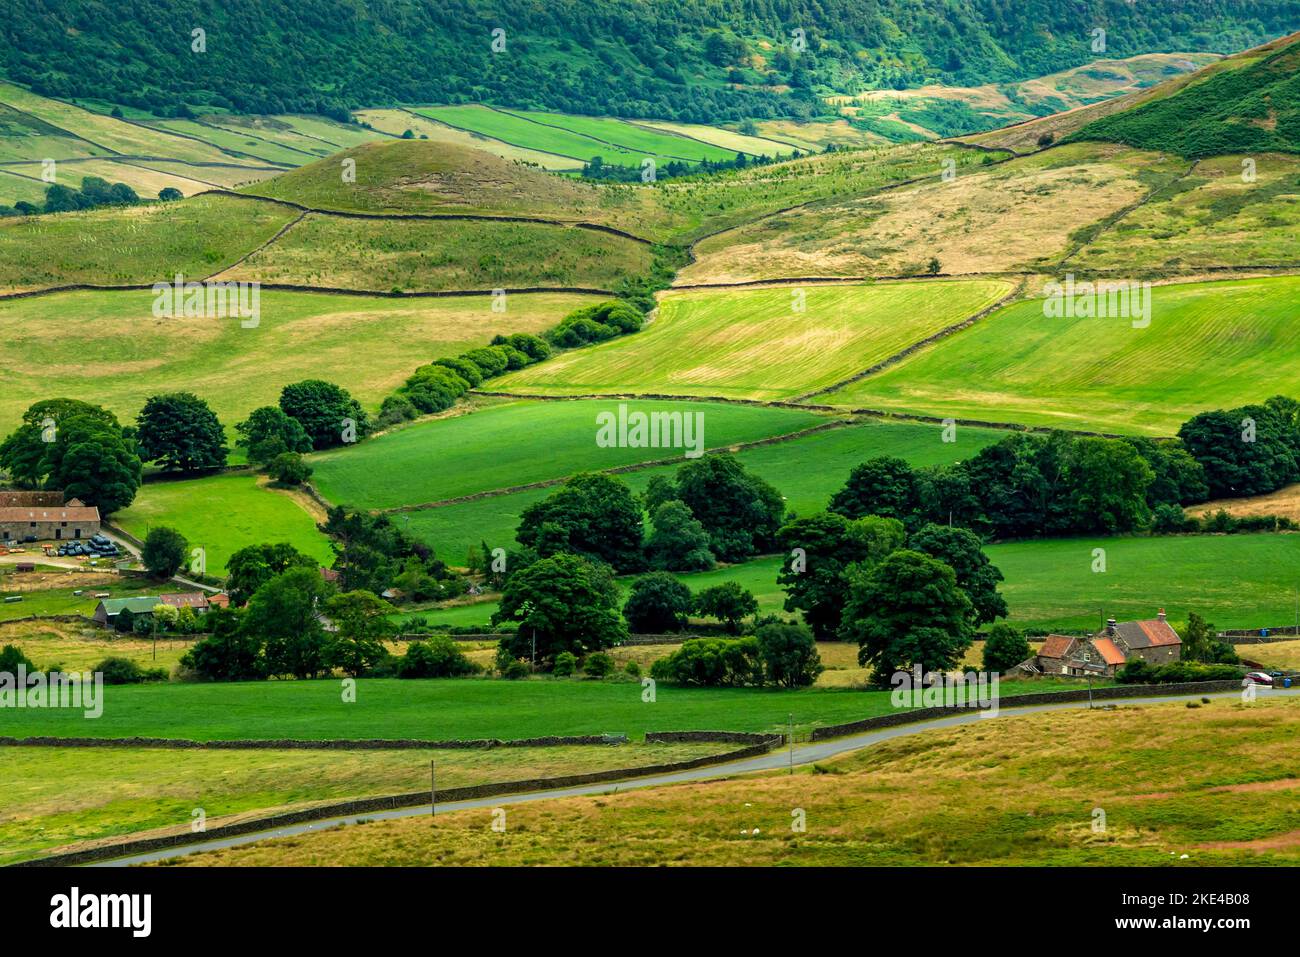 Farrmland a Crossley Side vicino a Ainthorpe Rigg vicino a Danby nel North York Moors National Park Yorkshire Inghilterra Regno Unito. Foto Stock